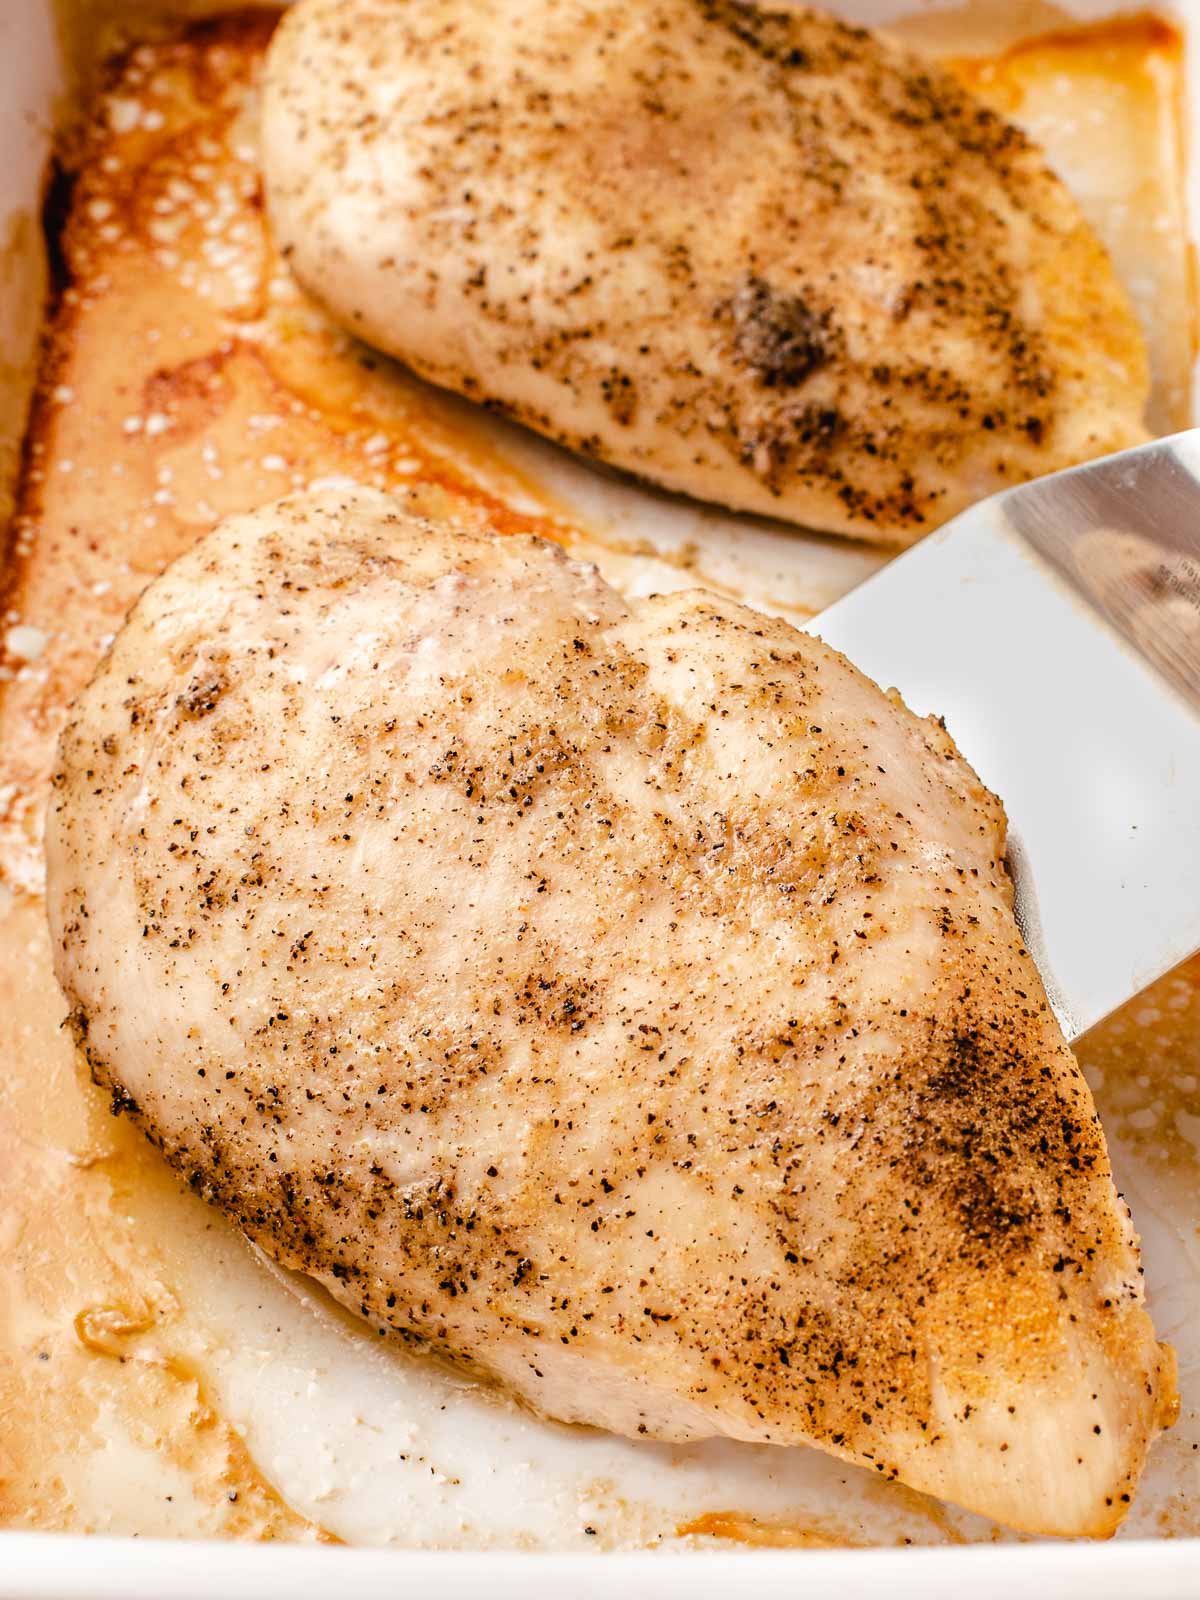 Baked chicken breast in a baking dish.